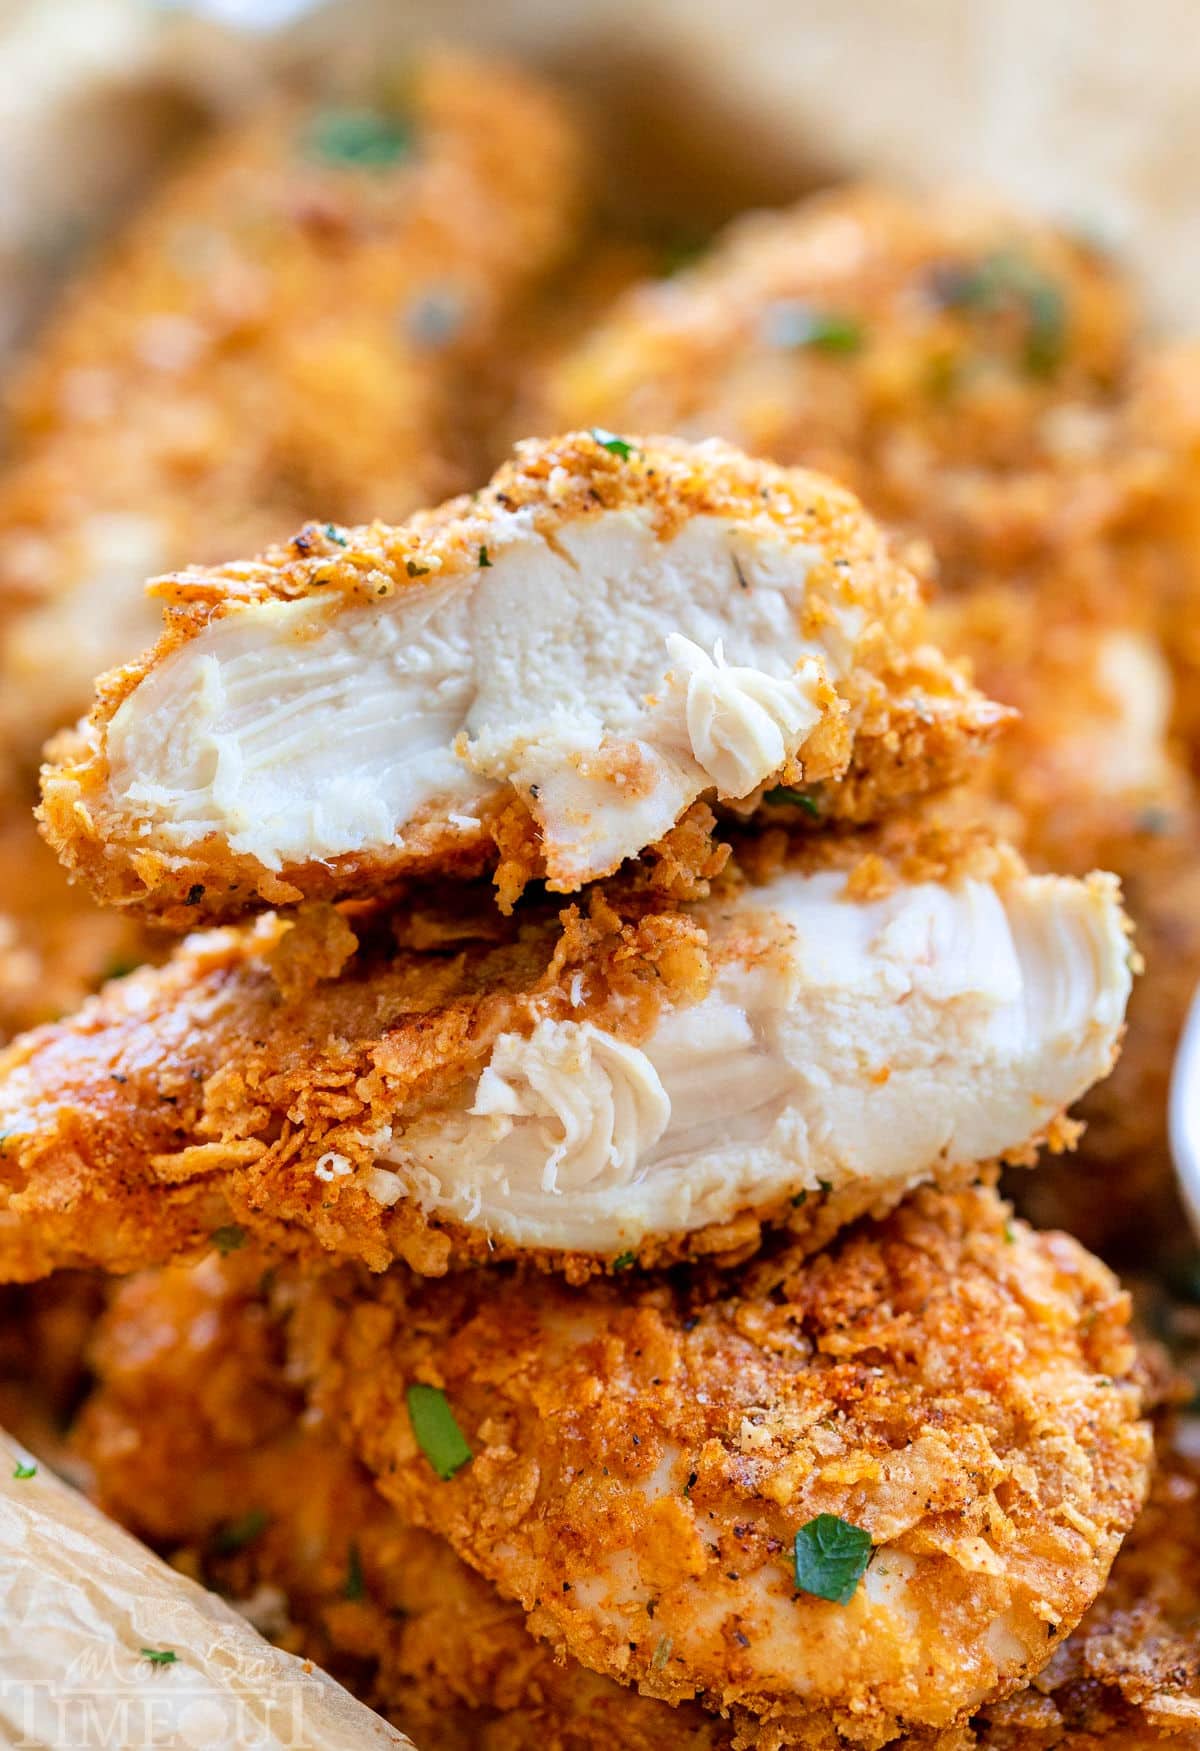 cornflake chicken in a pile with ranch dipping sauce. Top chicken tender is cut in half and stacked on each other showing the moist chicken and flavorful cornflake coating.